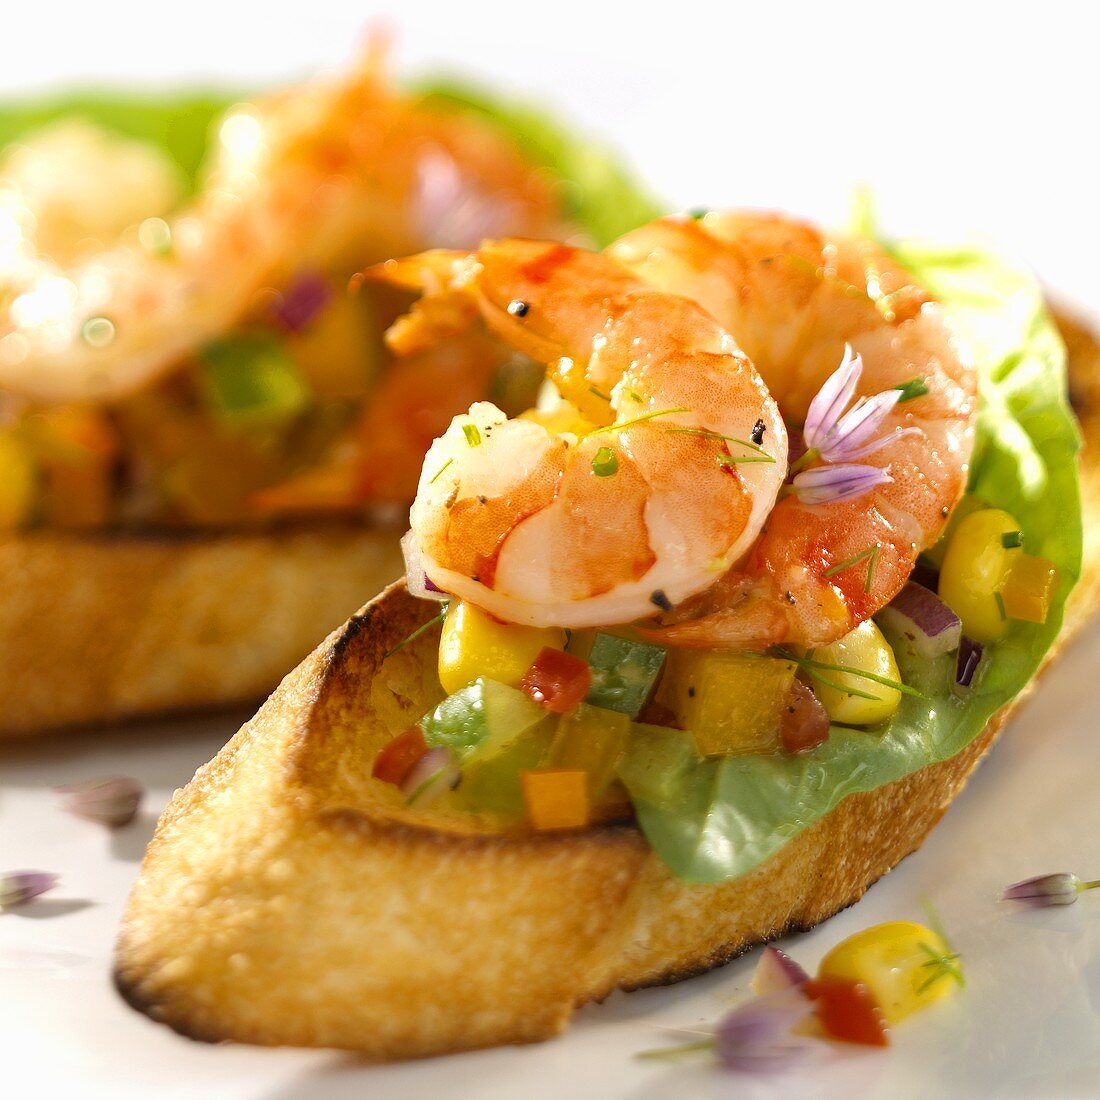 Crostini topped with shrimps and diced vegetables